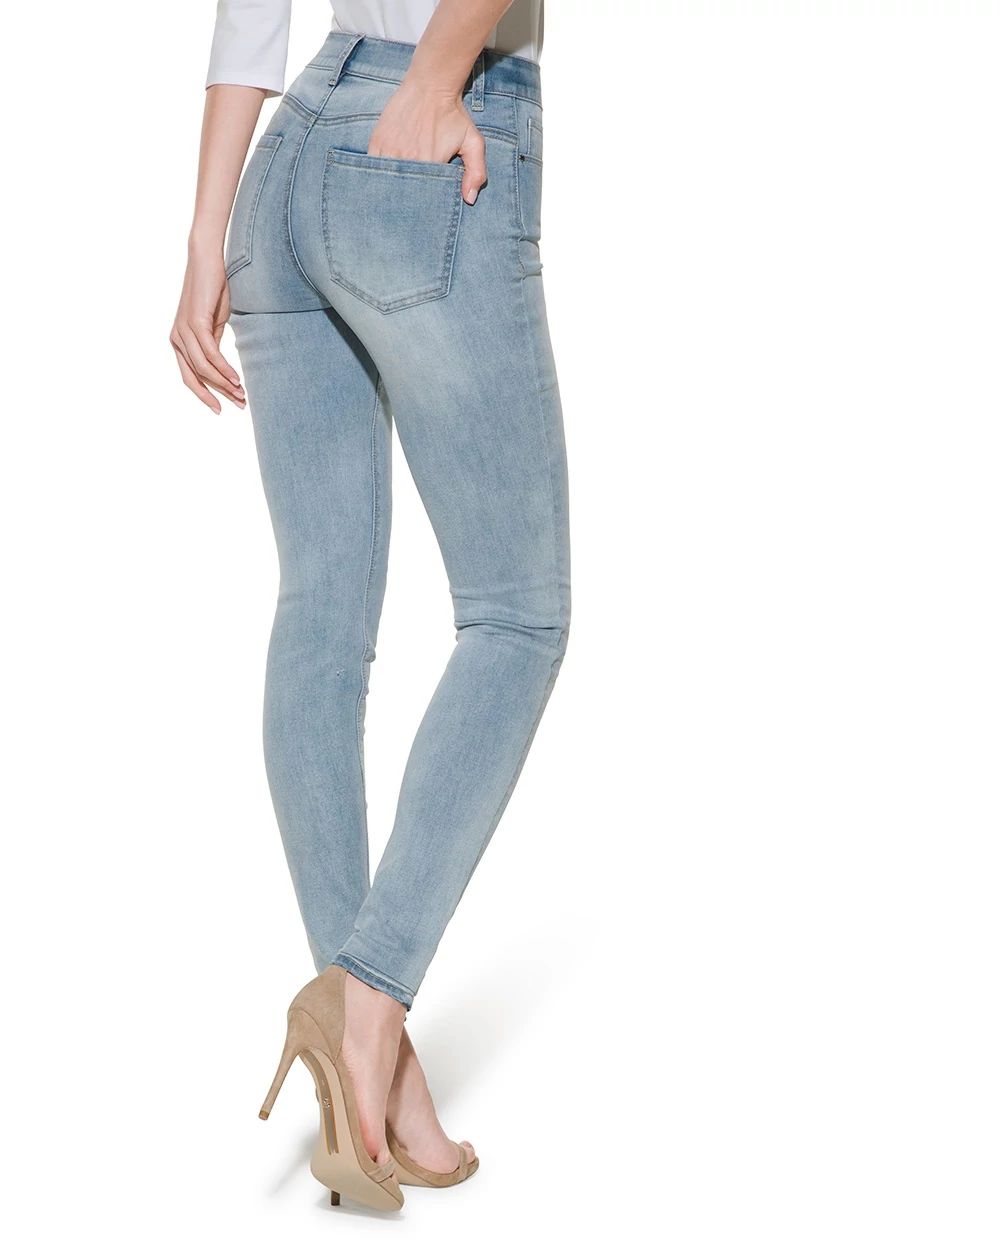 Outlet WHBM High-Rise Essential Slimmer® Skinny Jeans click to view larger image.